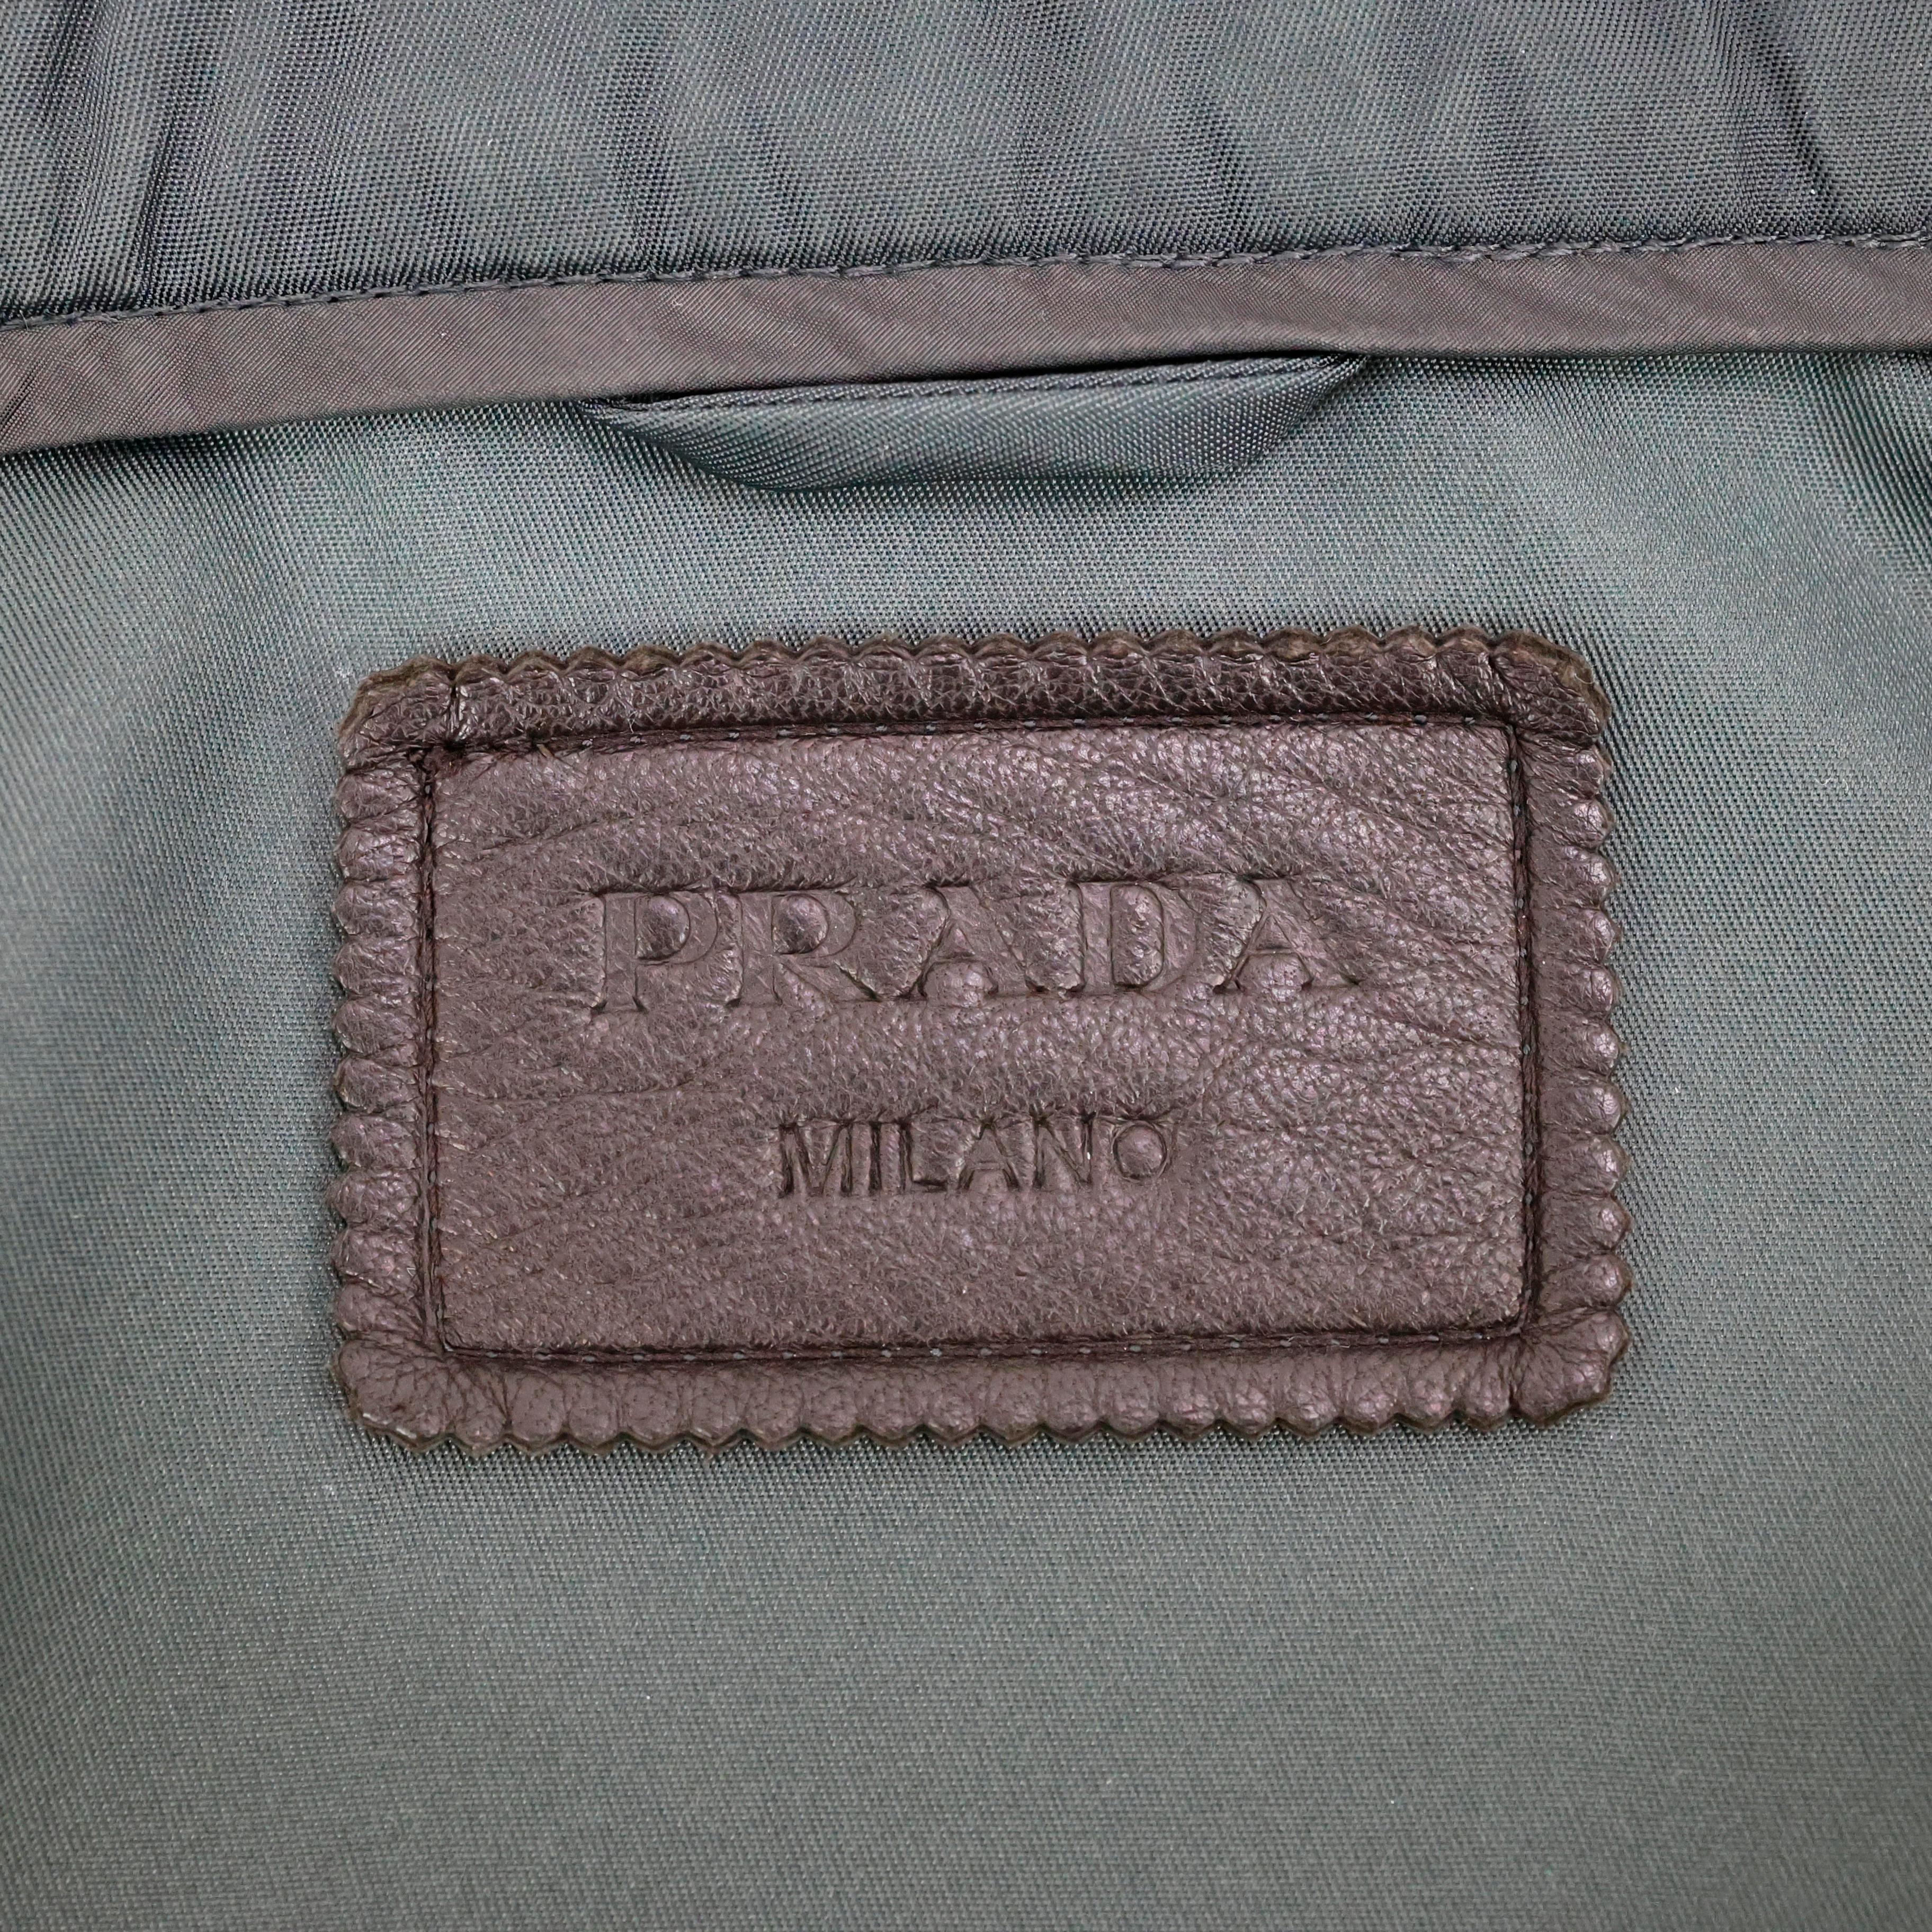 Prada Triangle Logo Jacket in Nylon and Leather For Sale 1